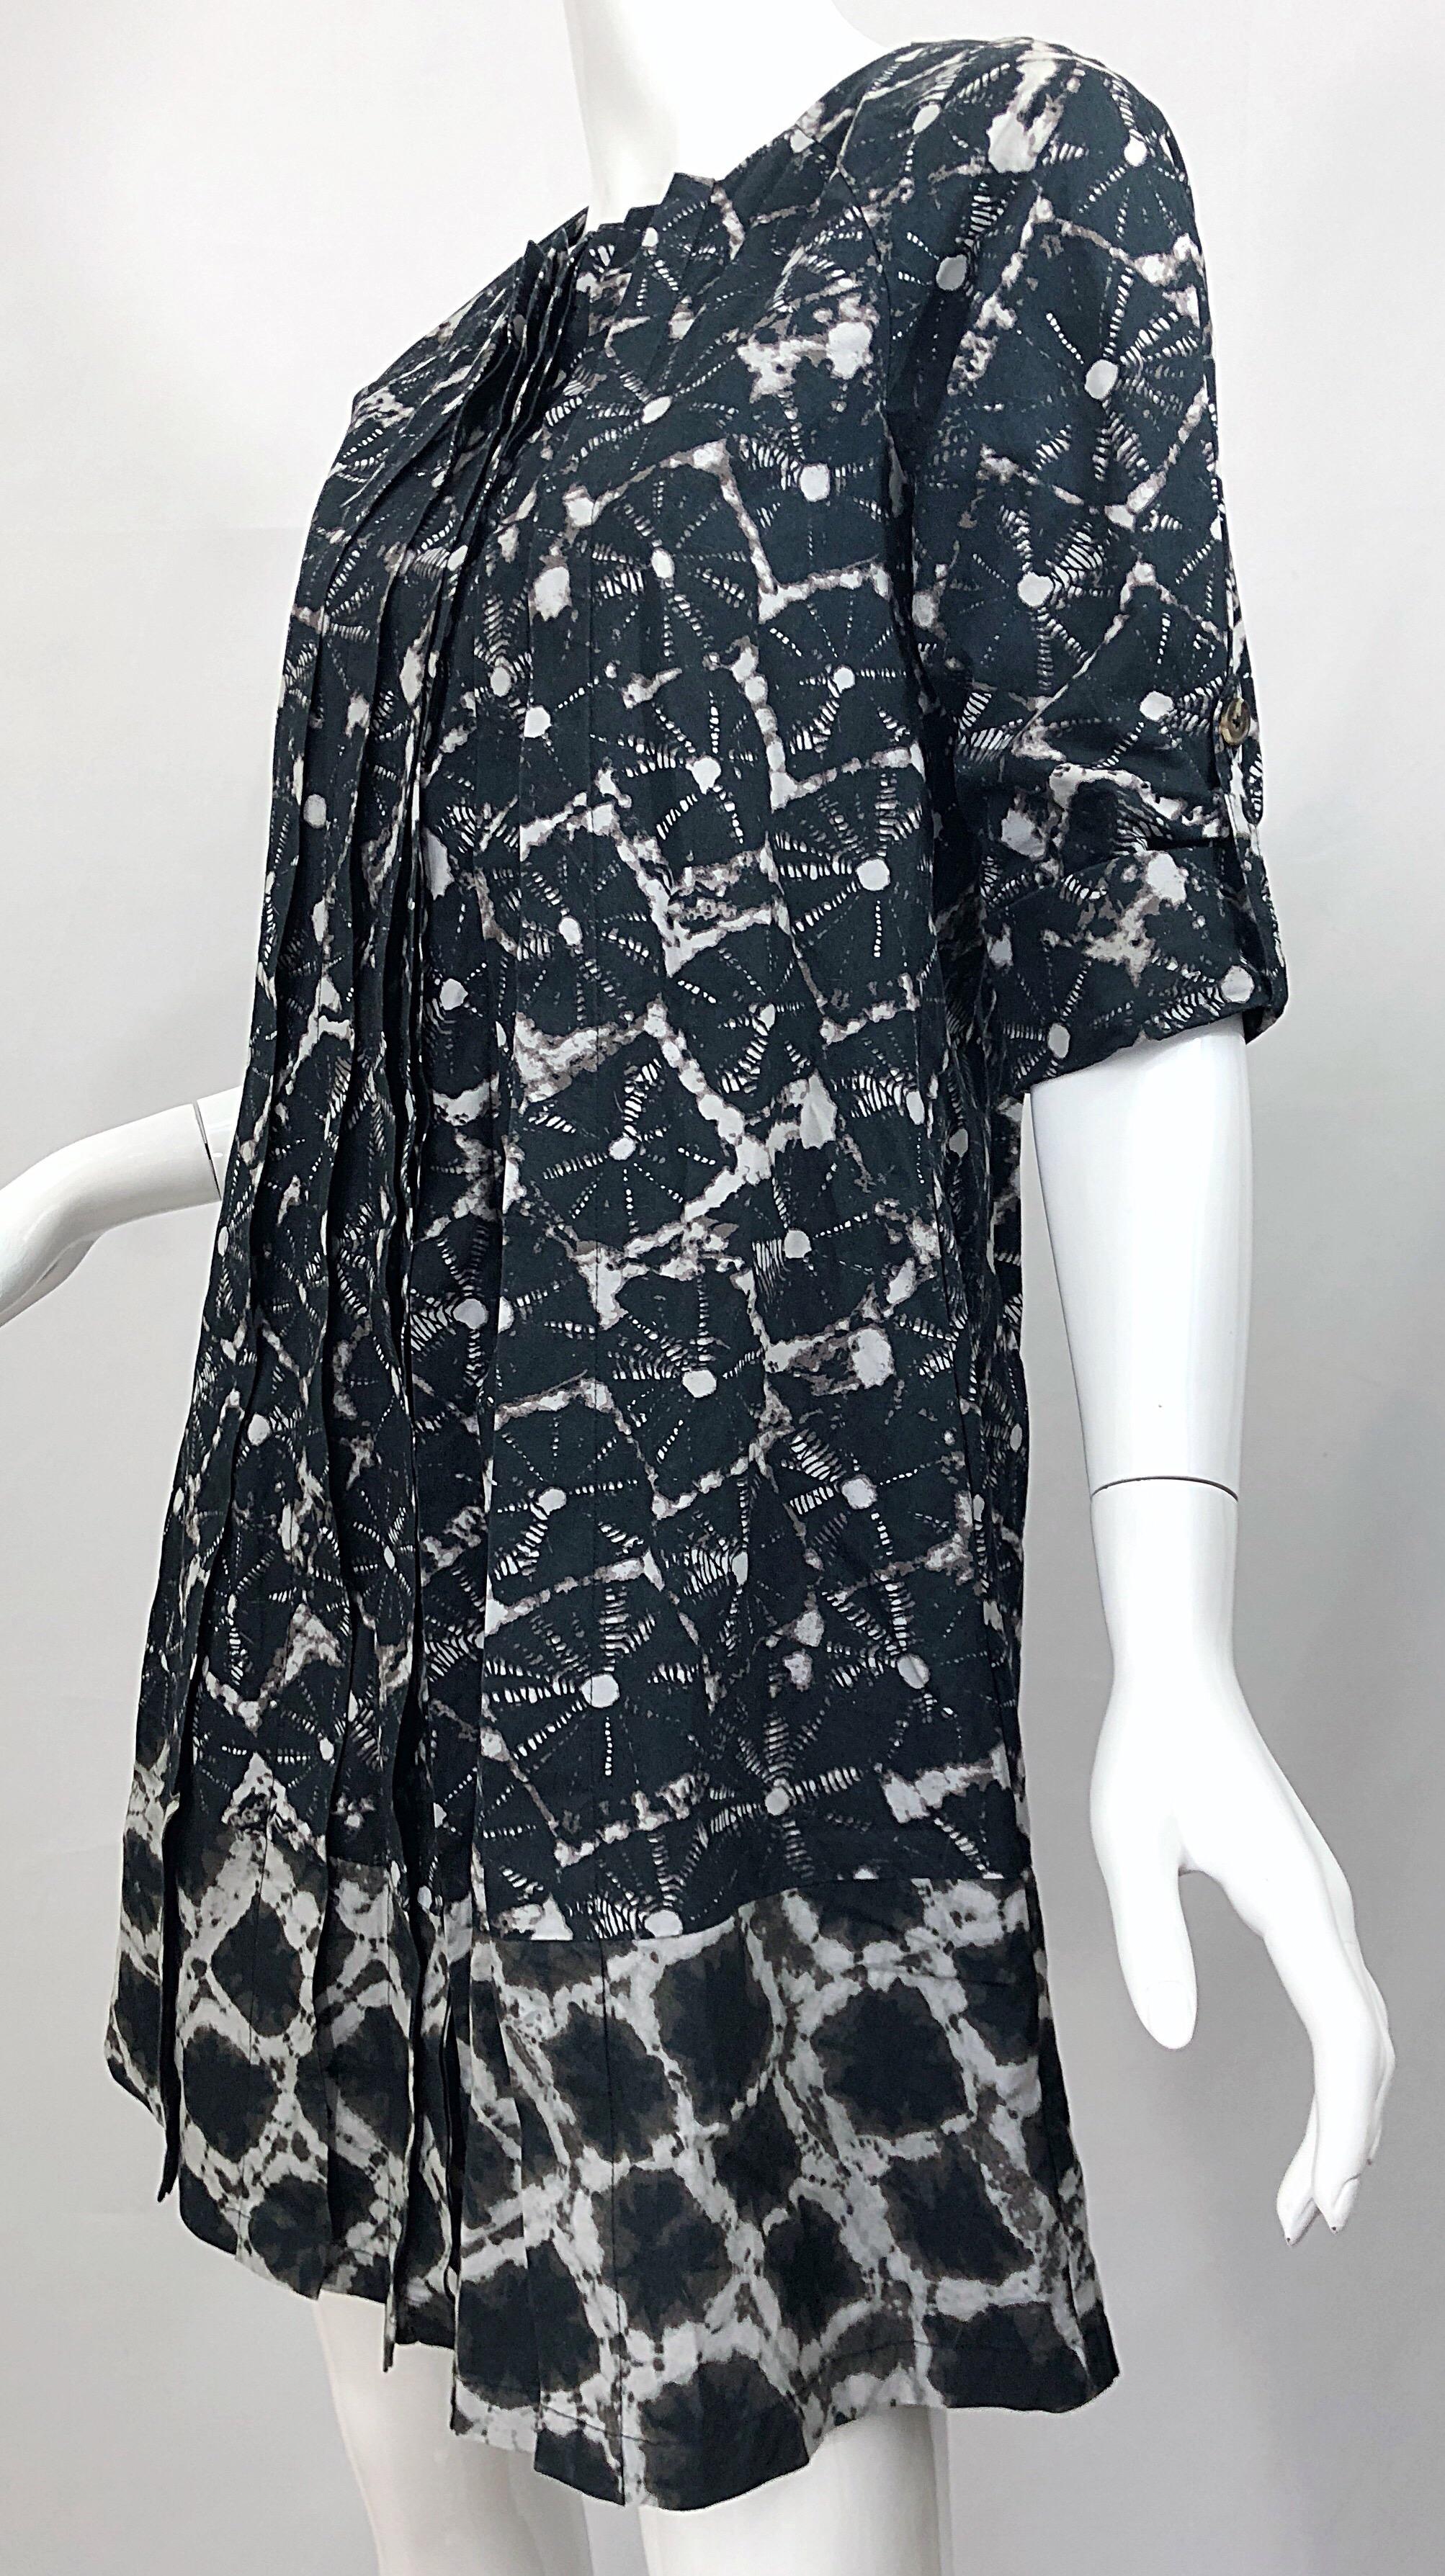 Thakoon Spring 2008 Black White Abstract Tie Dye Trapeze Swing Dress Jacket For Sale 5